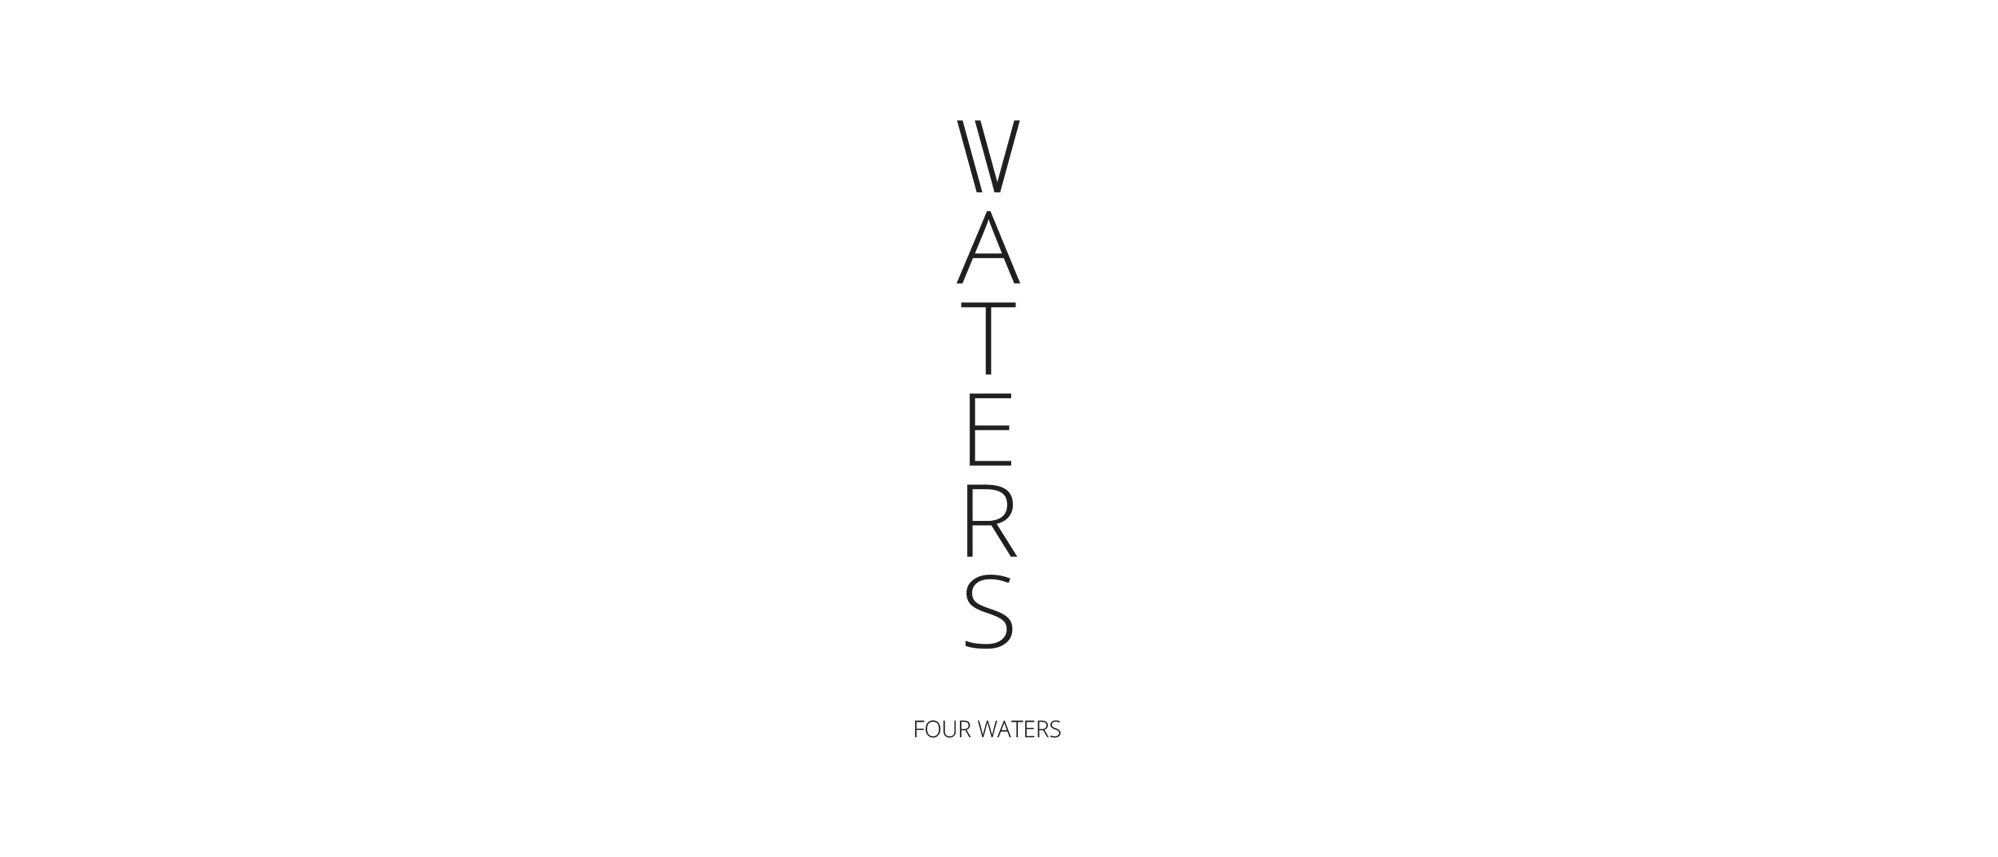 IVWATERS